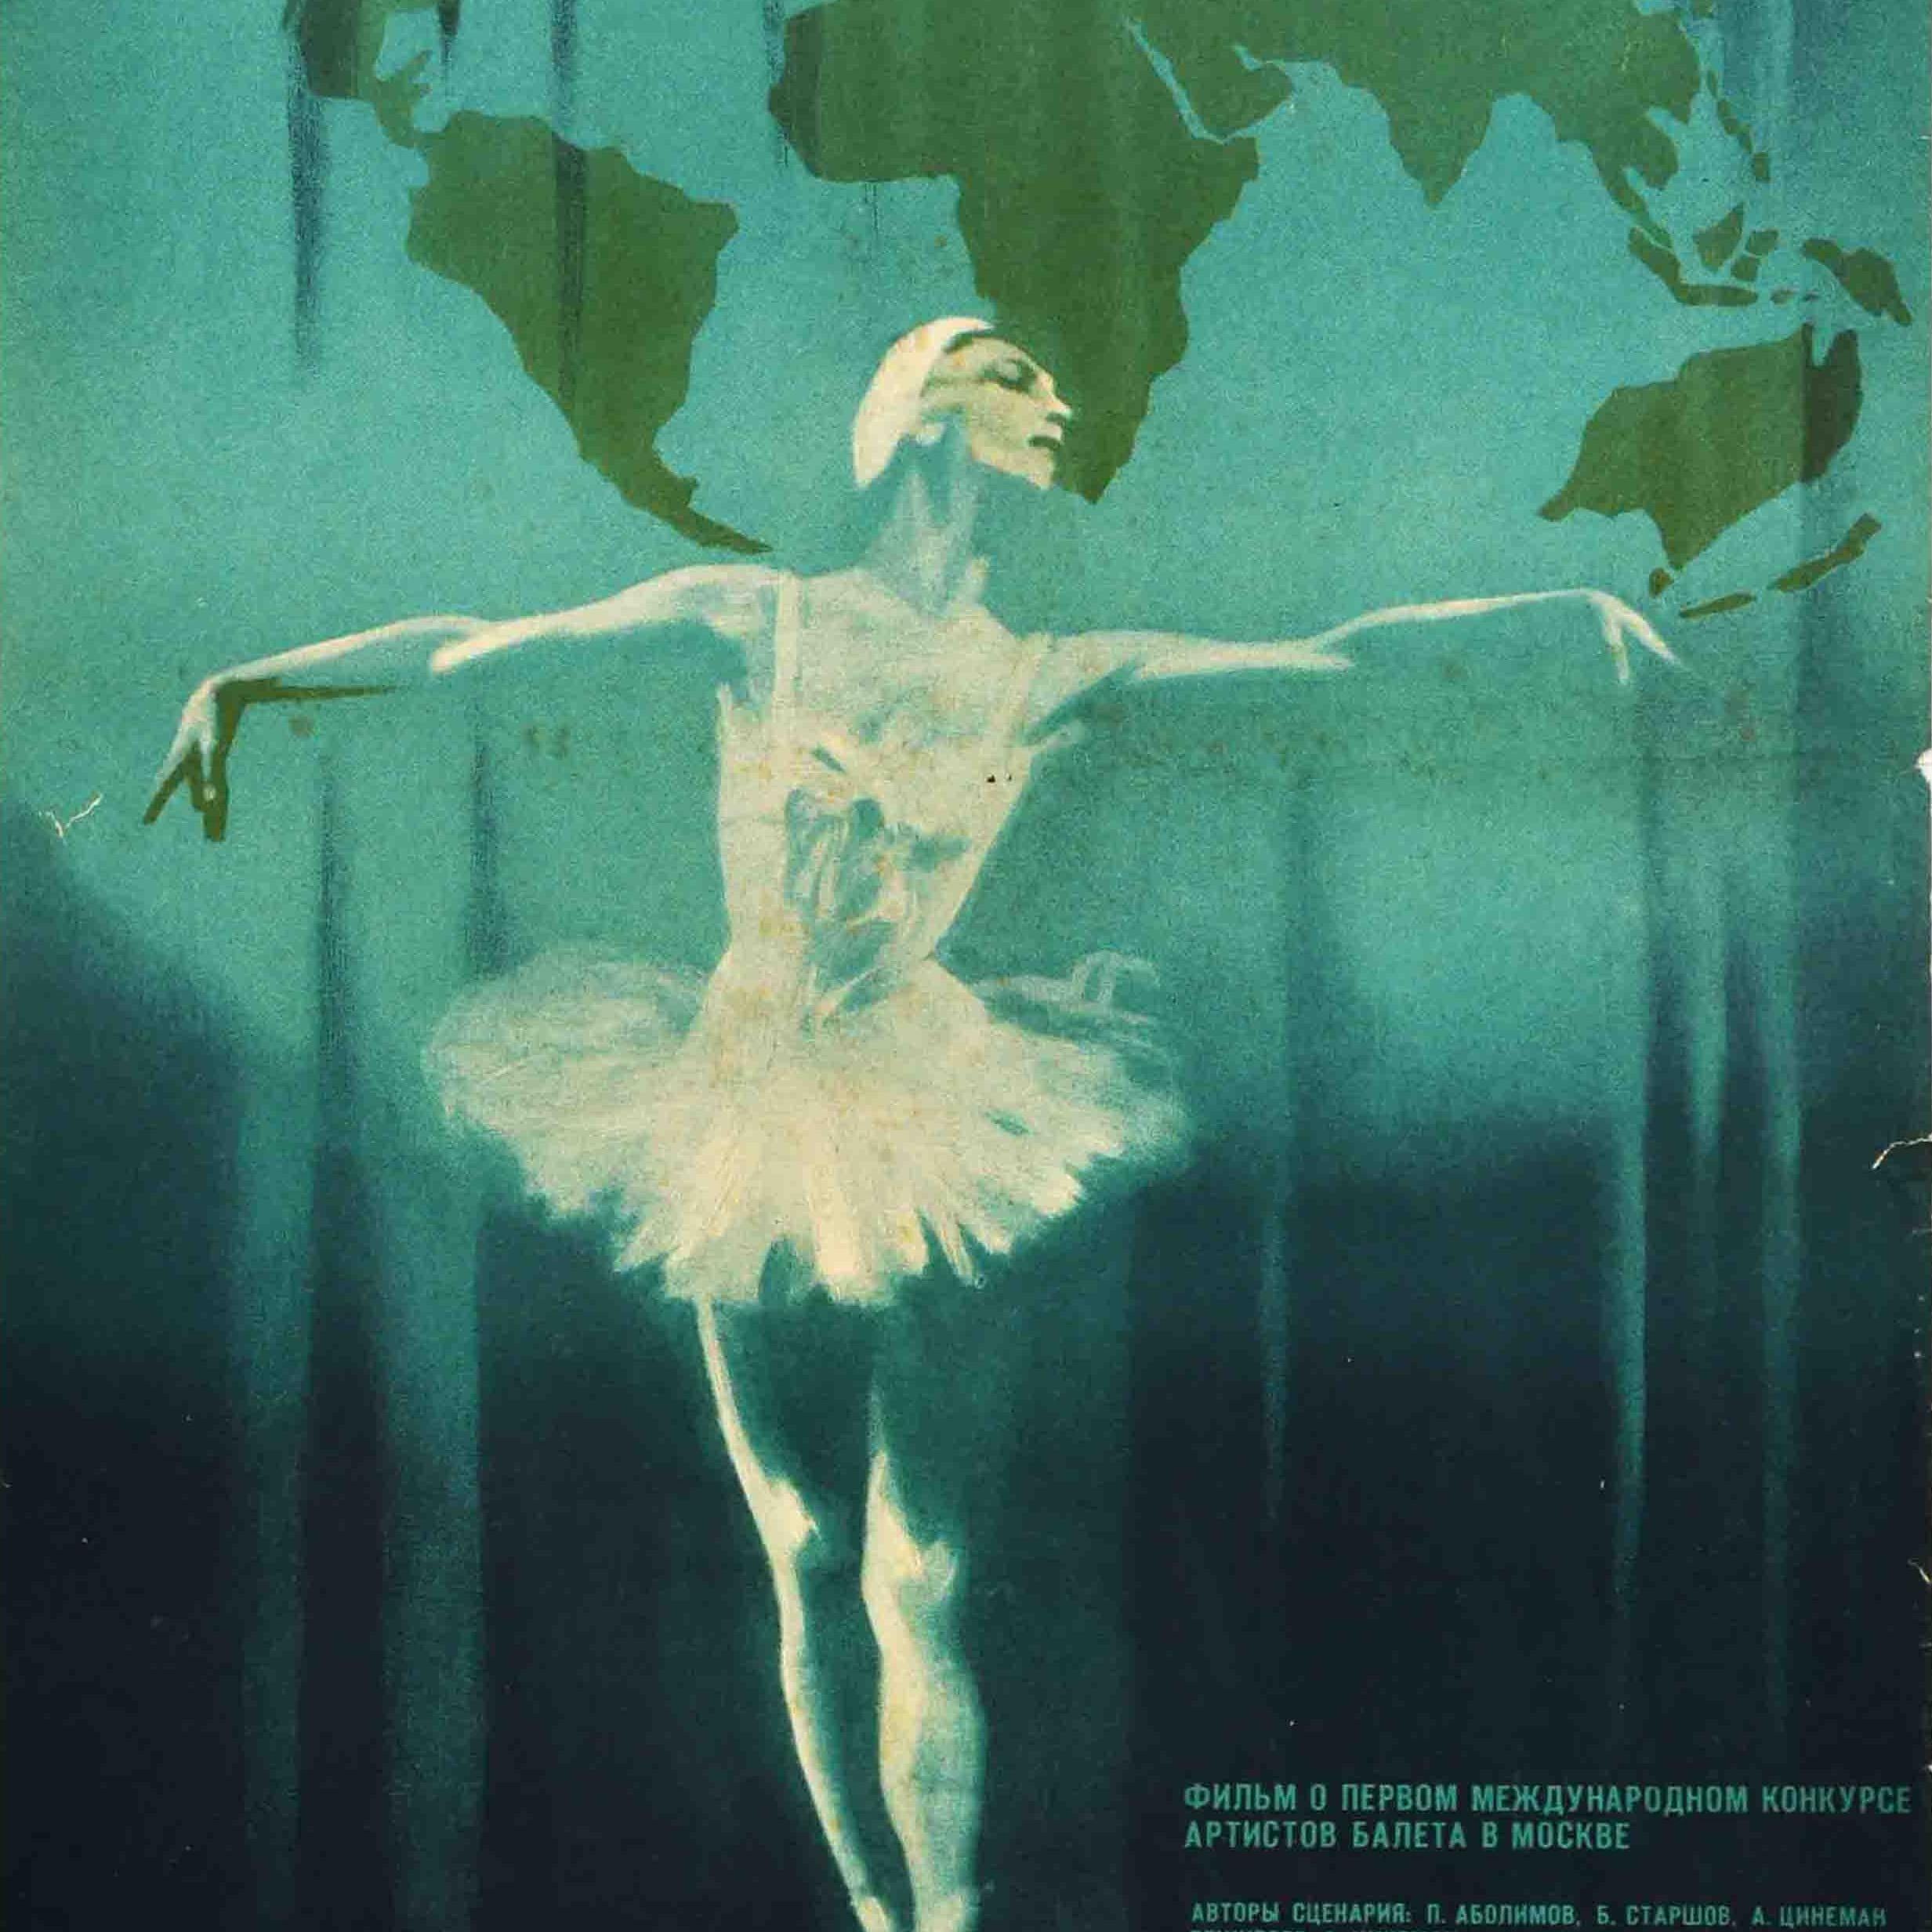 Original vintage Soviet film poster for a feature on the first International Ballet Competition for young ballet dancers held in Moscow - Молодой балет мира / Young World Ballet - showing a ballerina (possibly the prima ballerina Ludmila Semenyaka